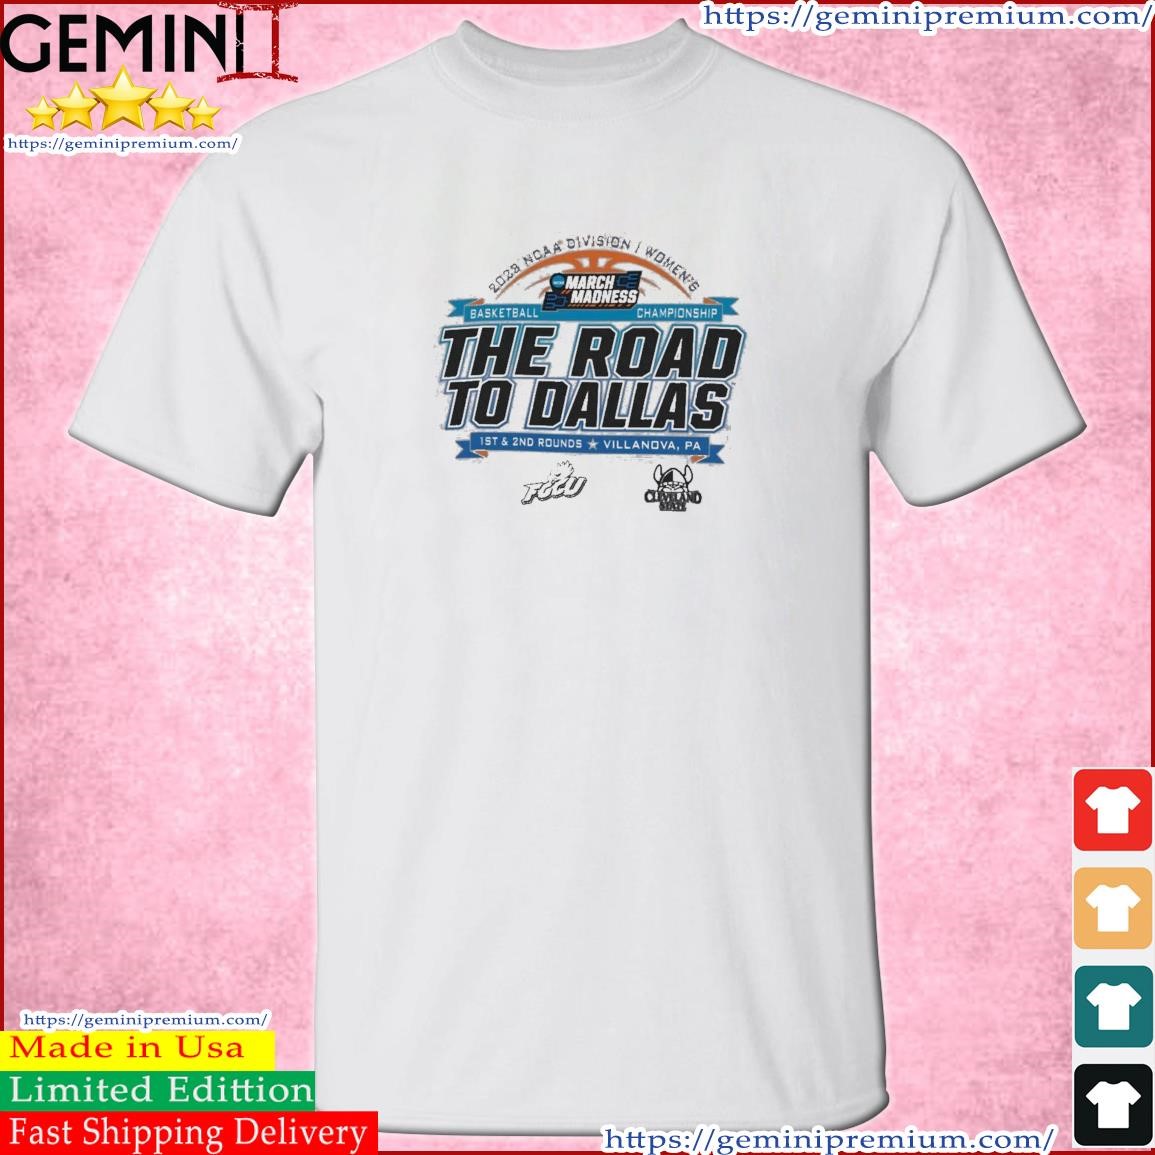 2023 NCAA Division I Women's Basketball The Road To Dallas March Madness 1st & 2nd Rounds Villanova, PA Shirt